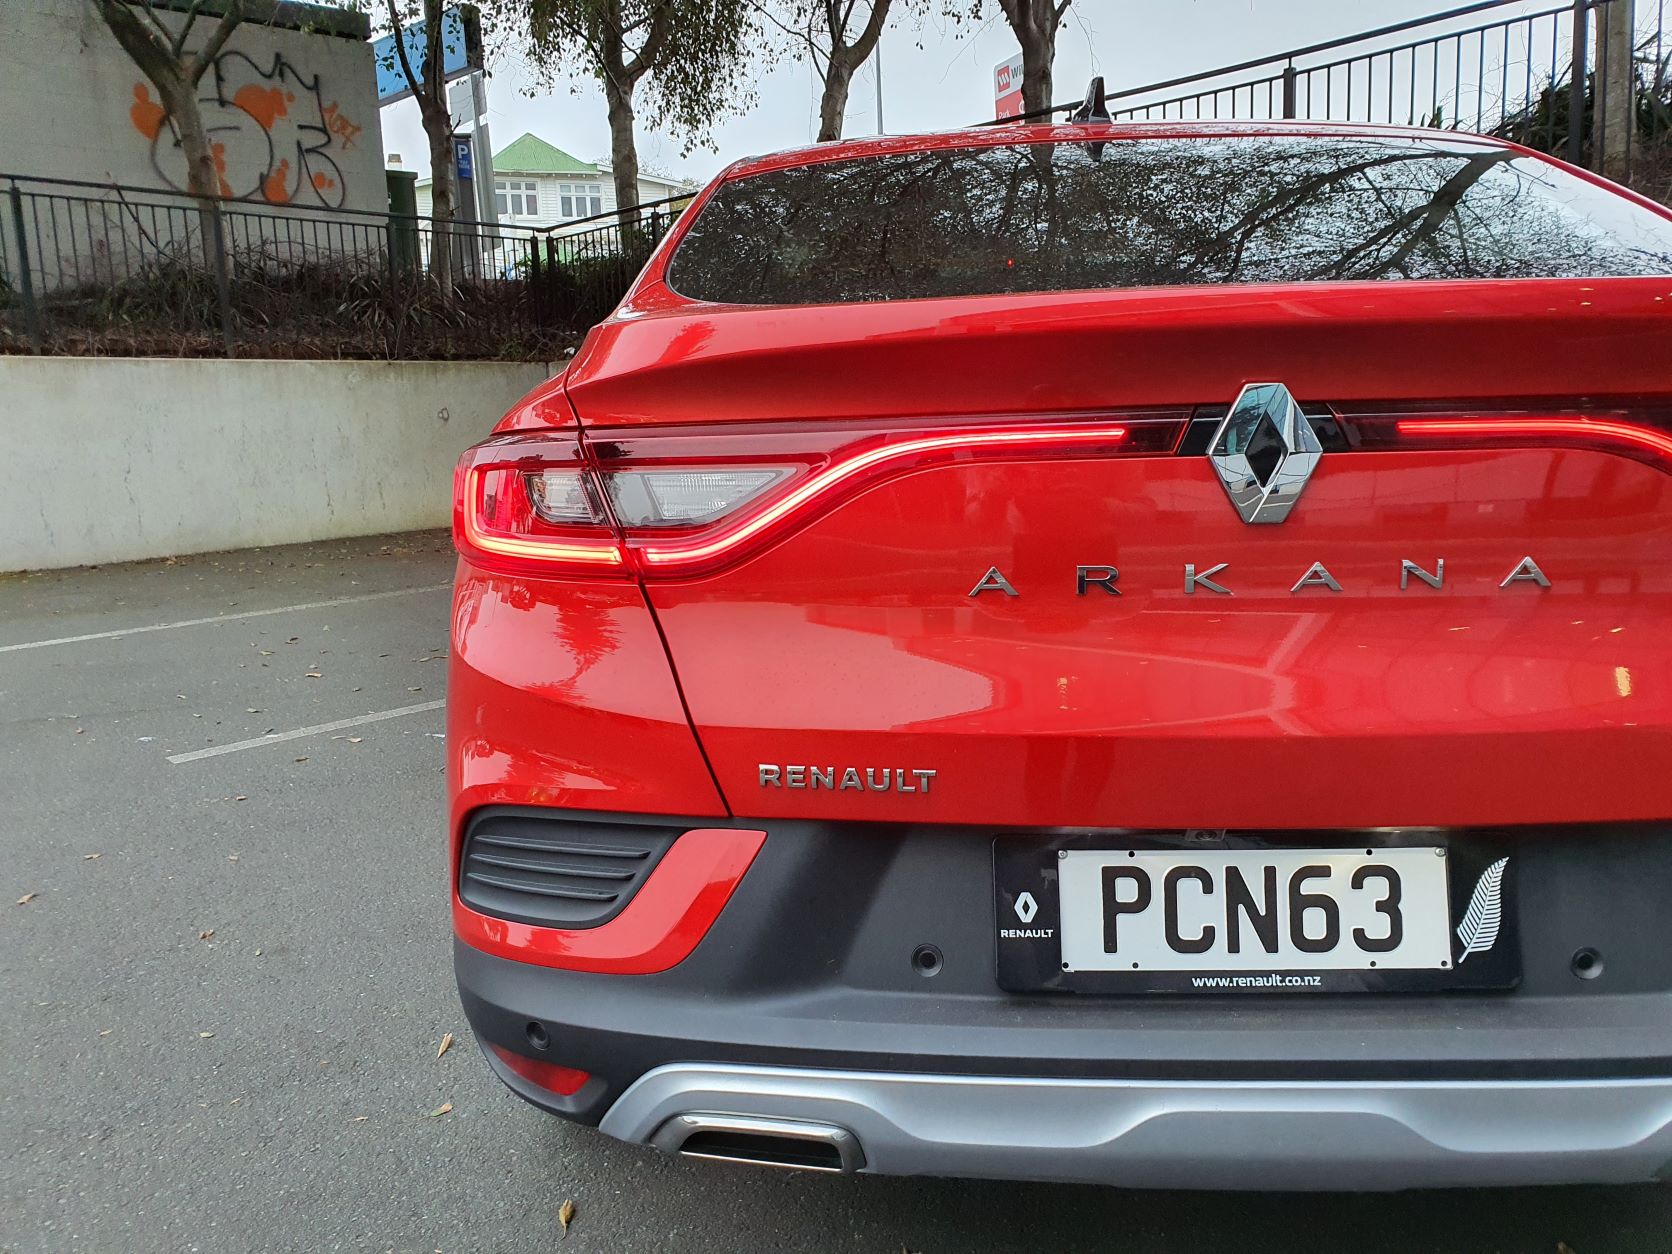 Rear view of the Renault Arkana in Red